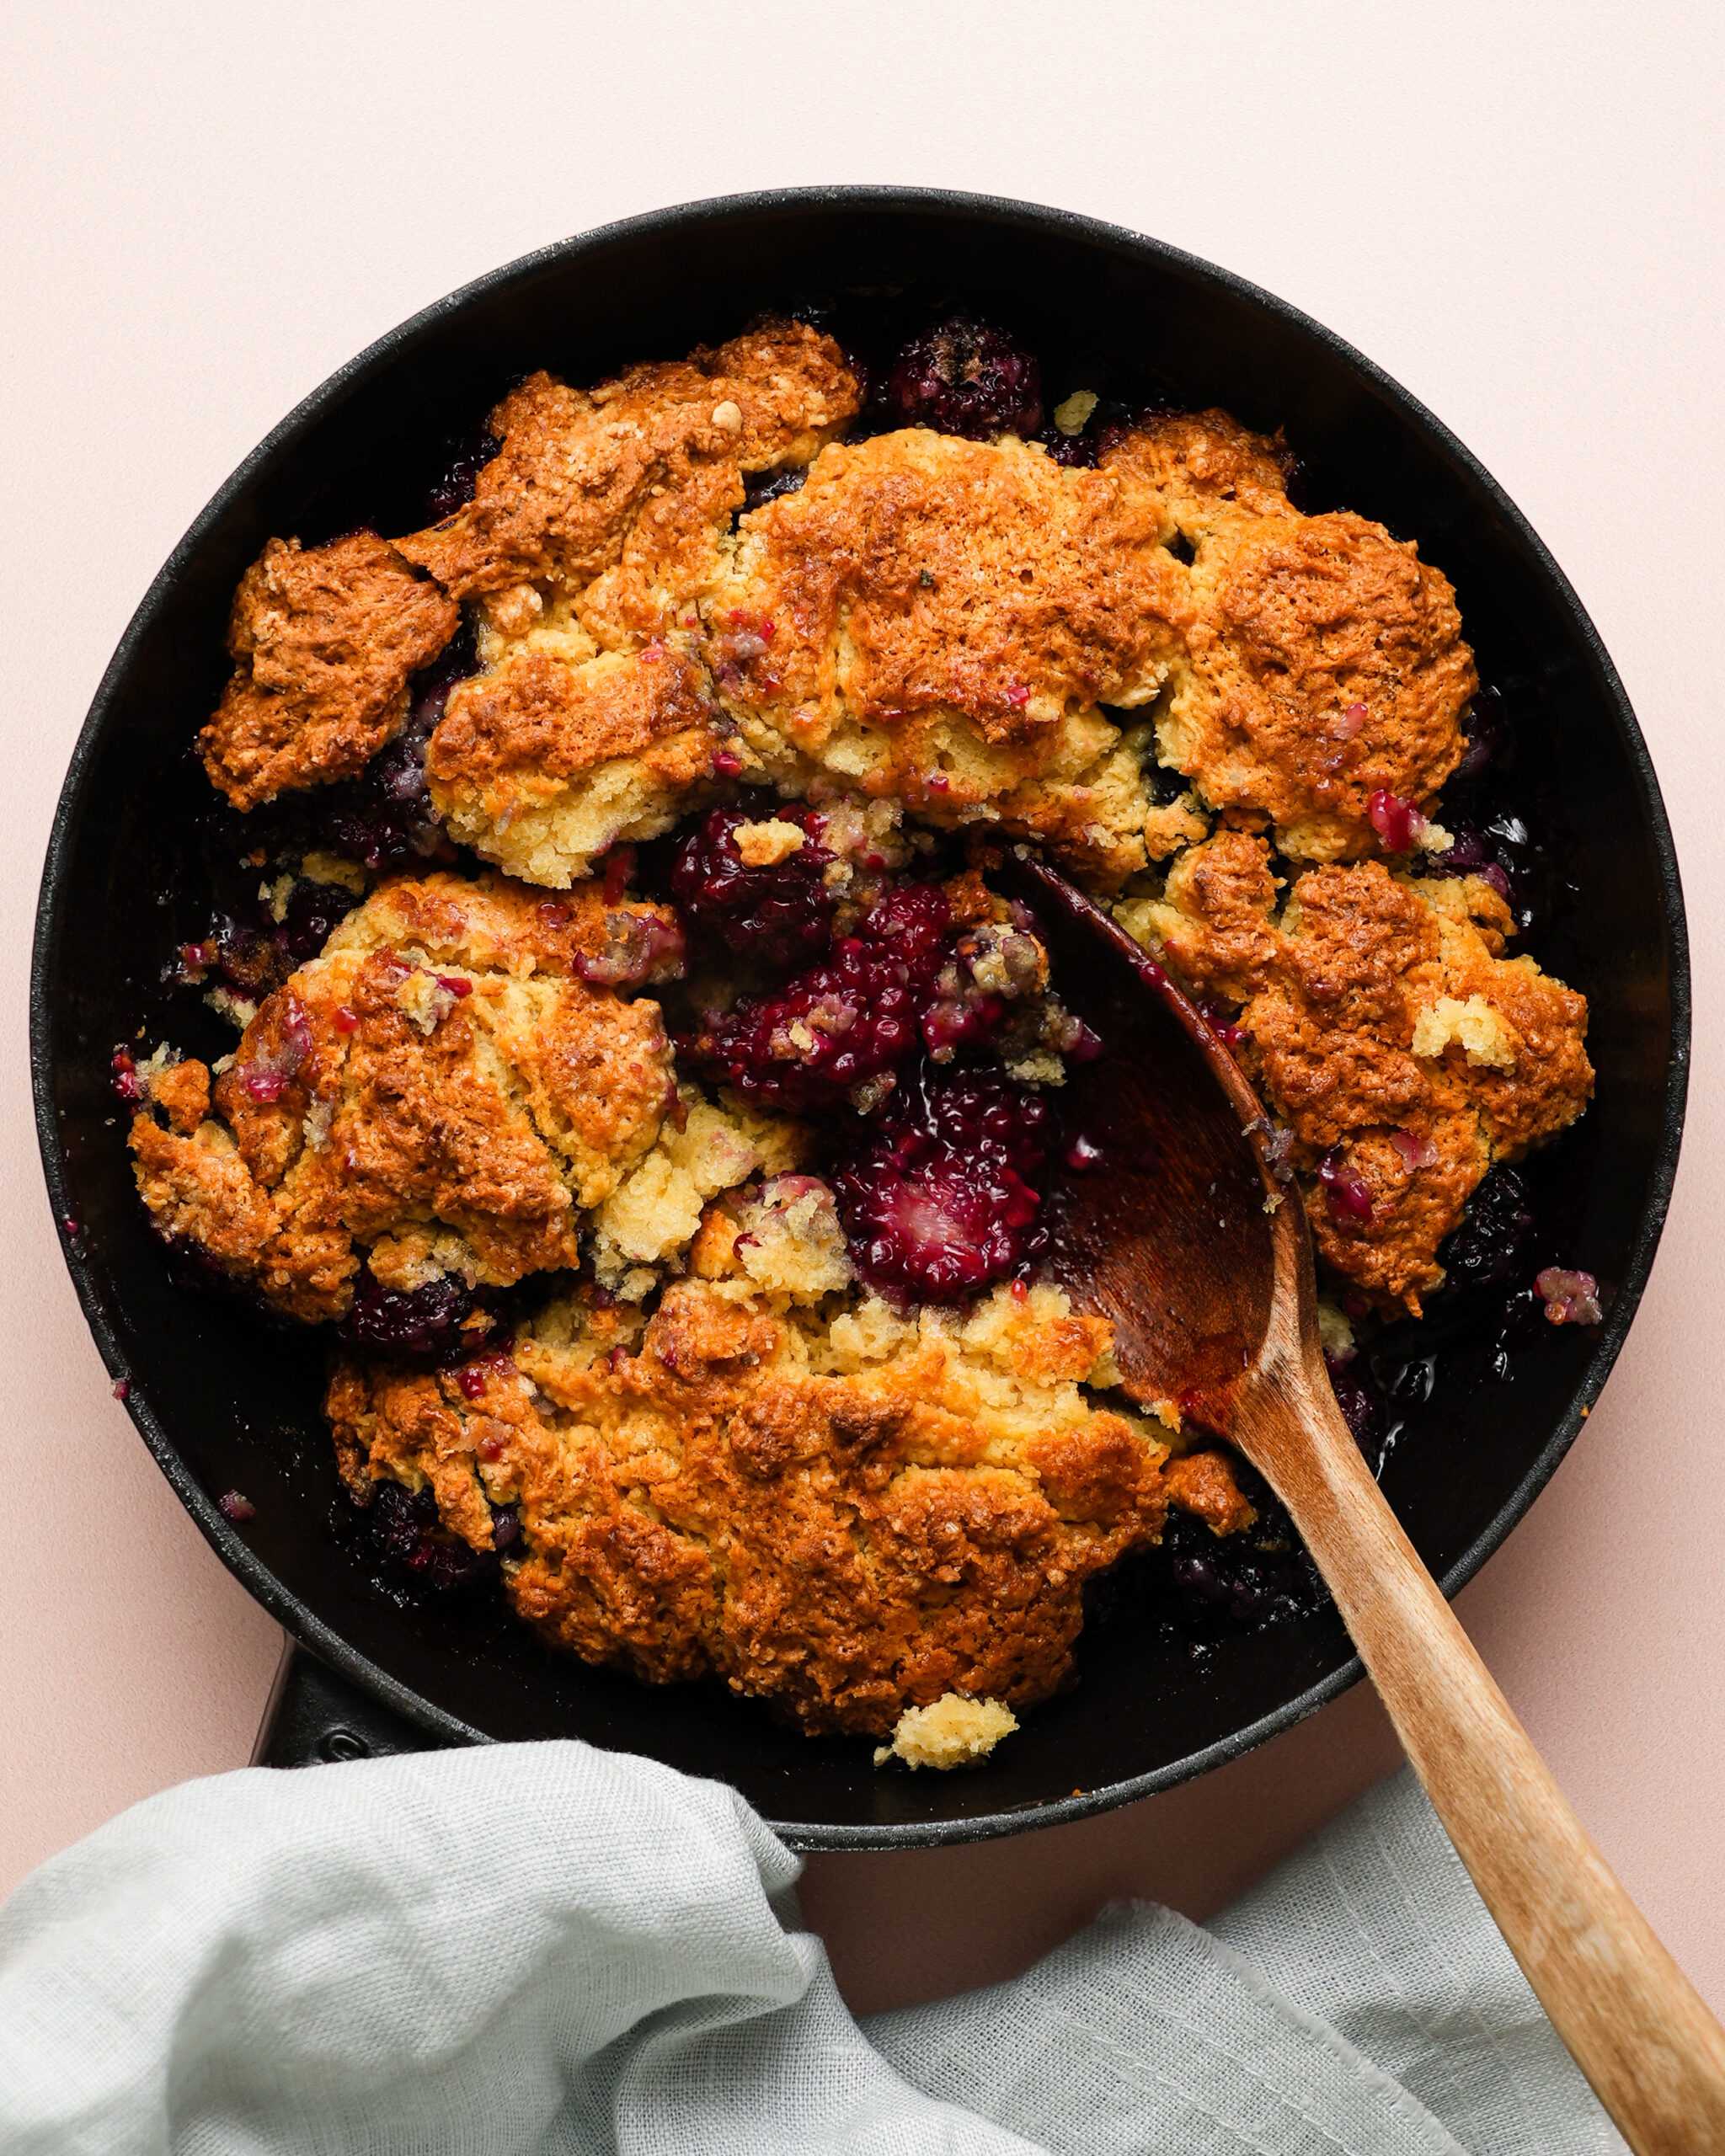 A fresh blackberry cobbler sits at the center of the image.